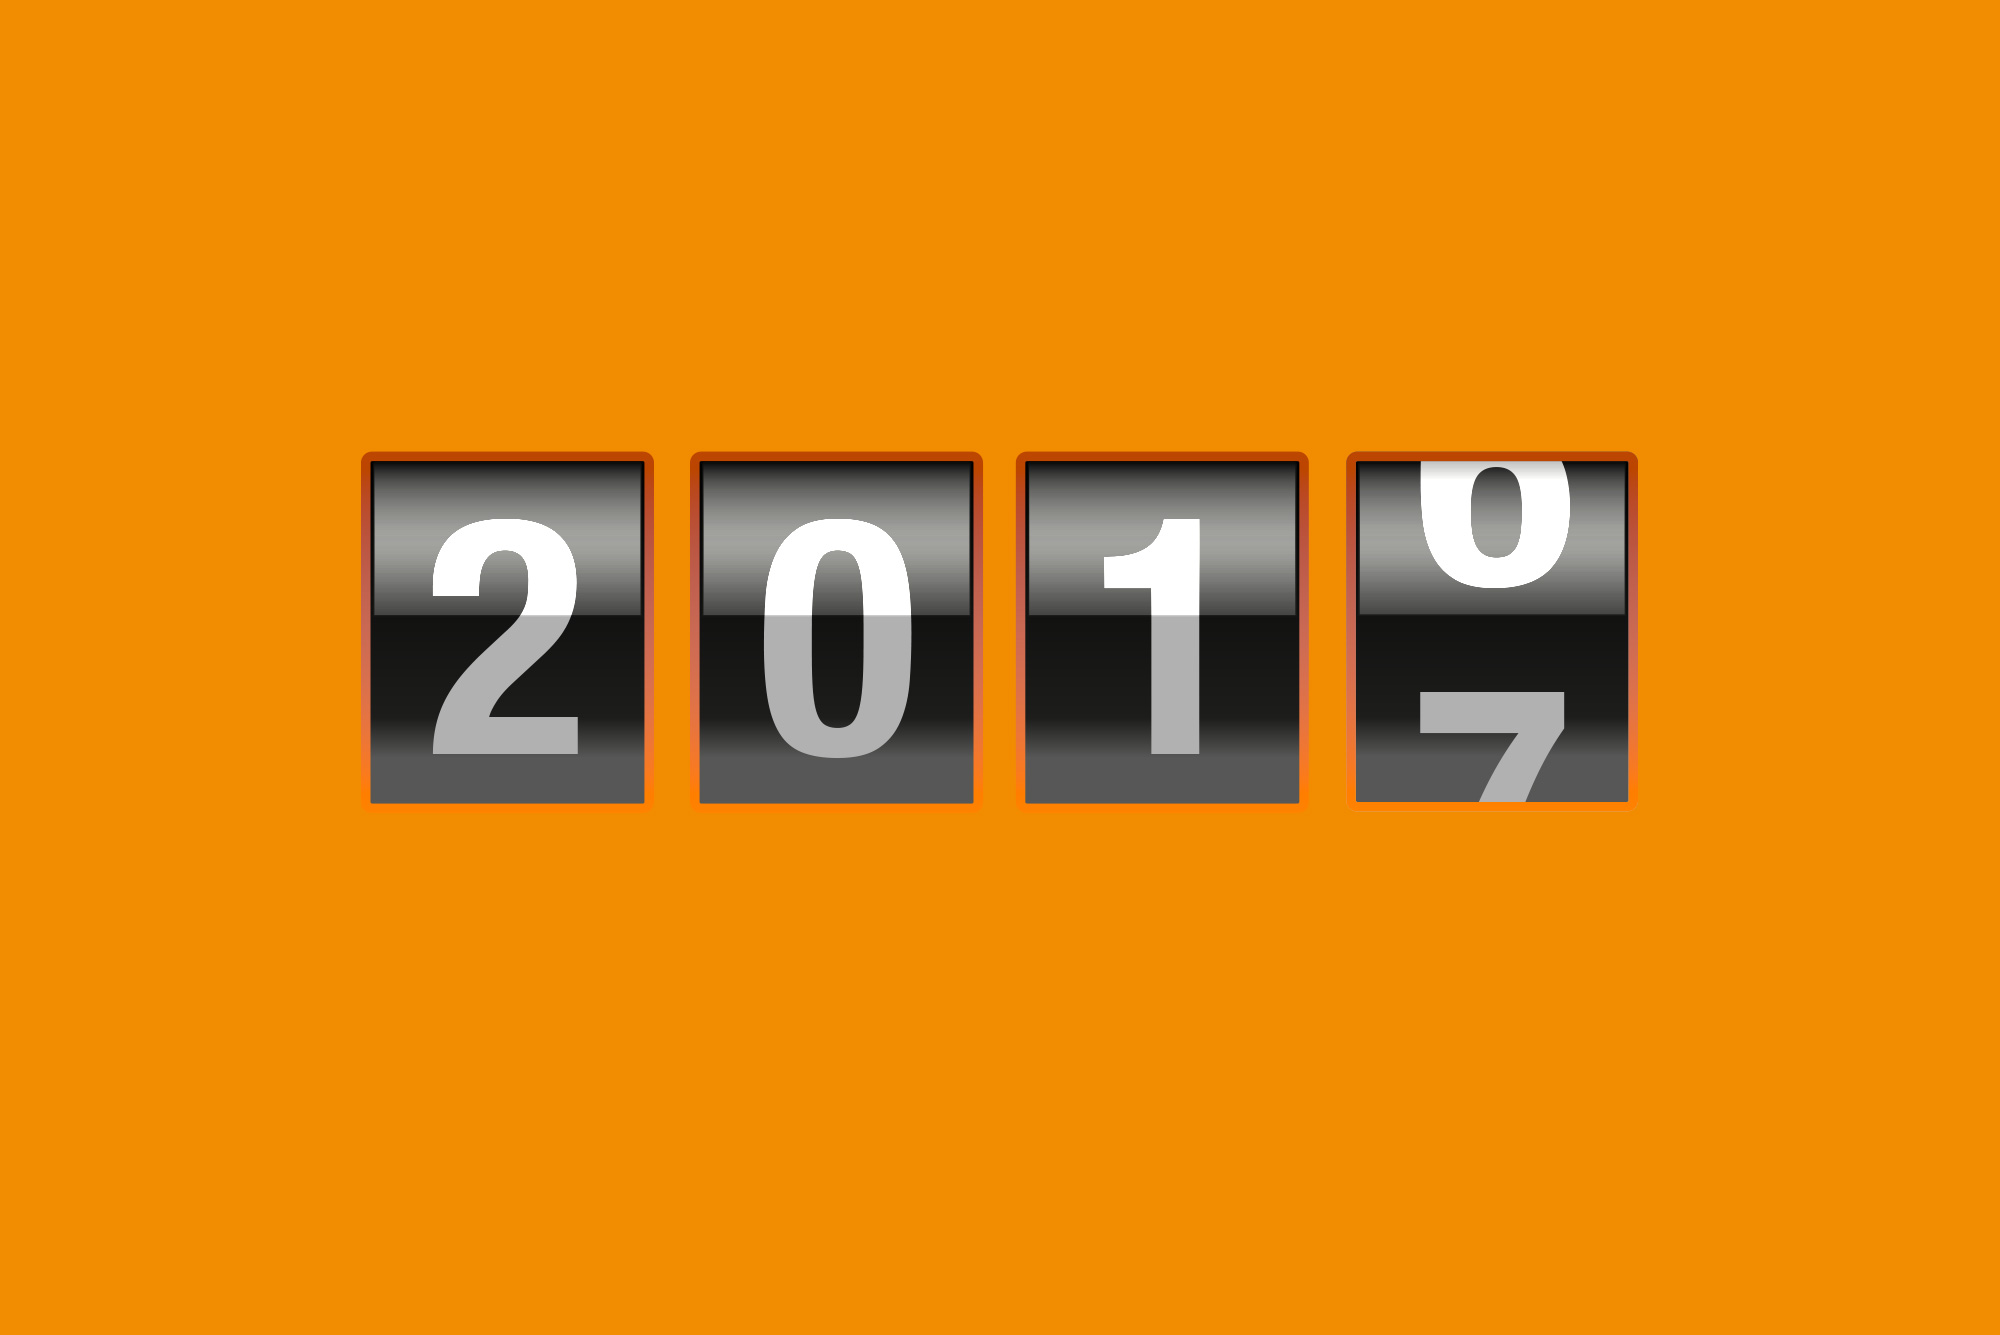 2016 rolling over to 2017 with orange background